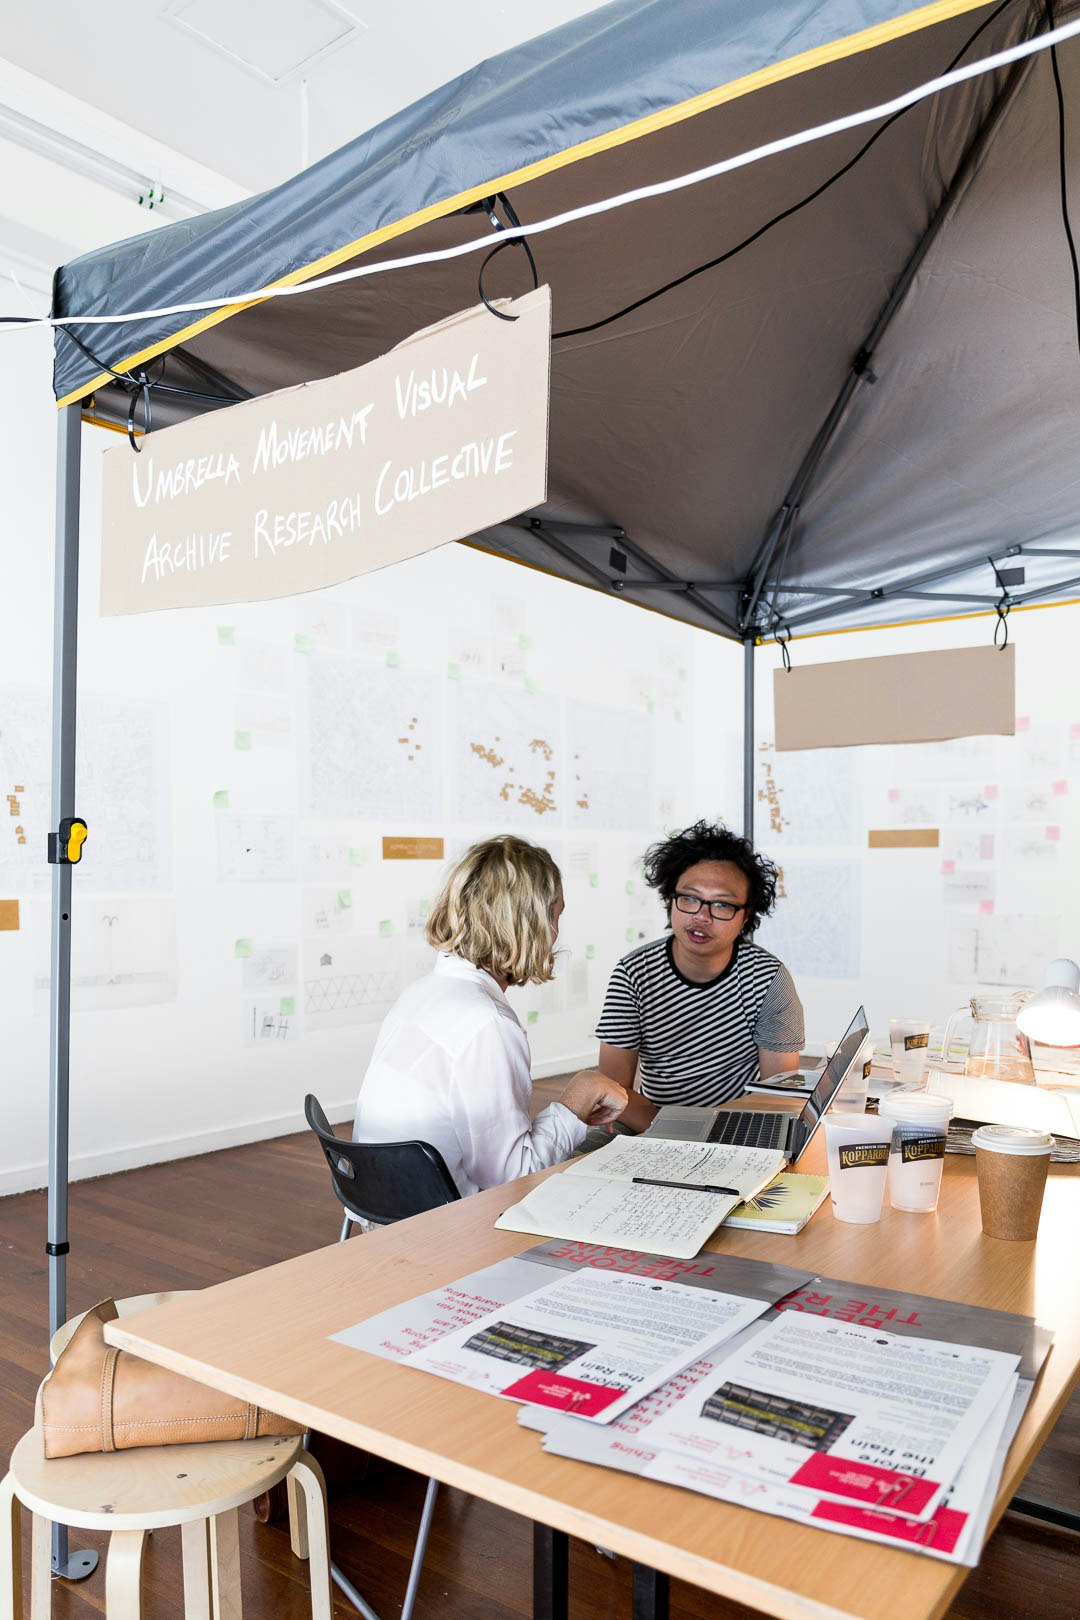 Sampson Wong, an East Asian male-presenting figure in a black and white striped t-shirt and glasses, talks to a blonde female-presenting figure under a gazebo with the banner: Umbrella Movement Visual Archive Research Collective.